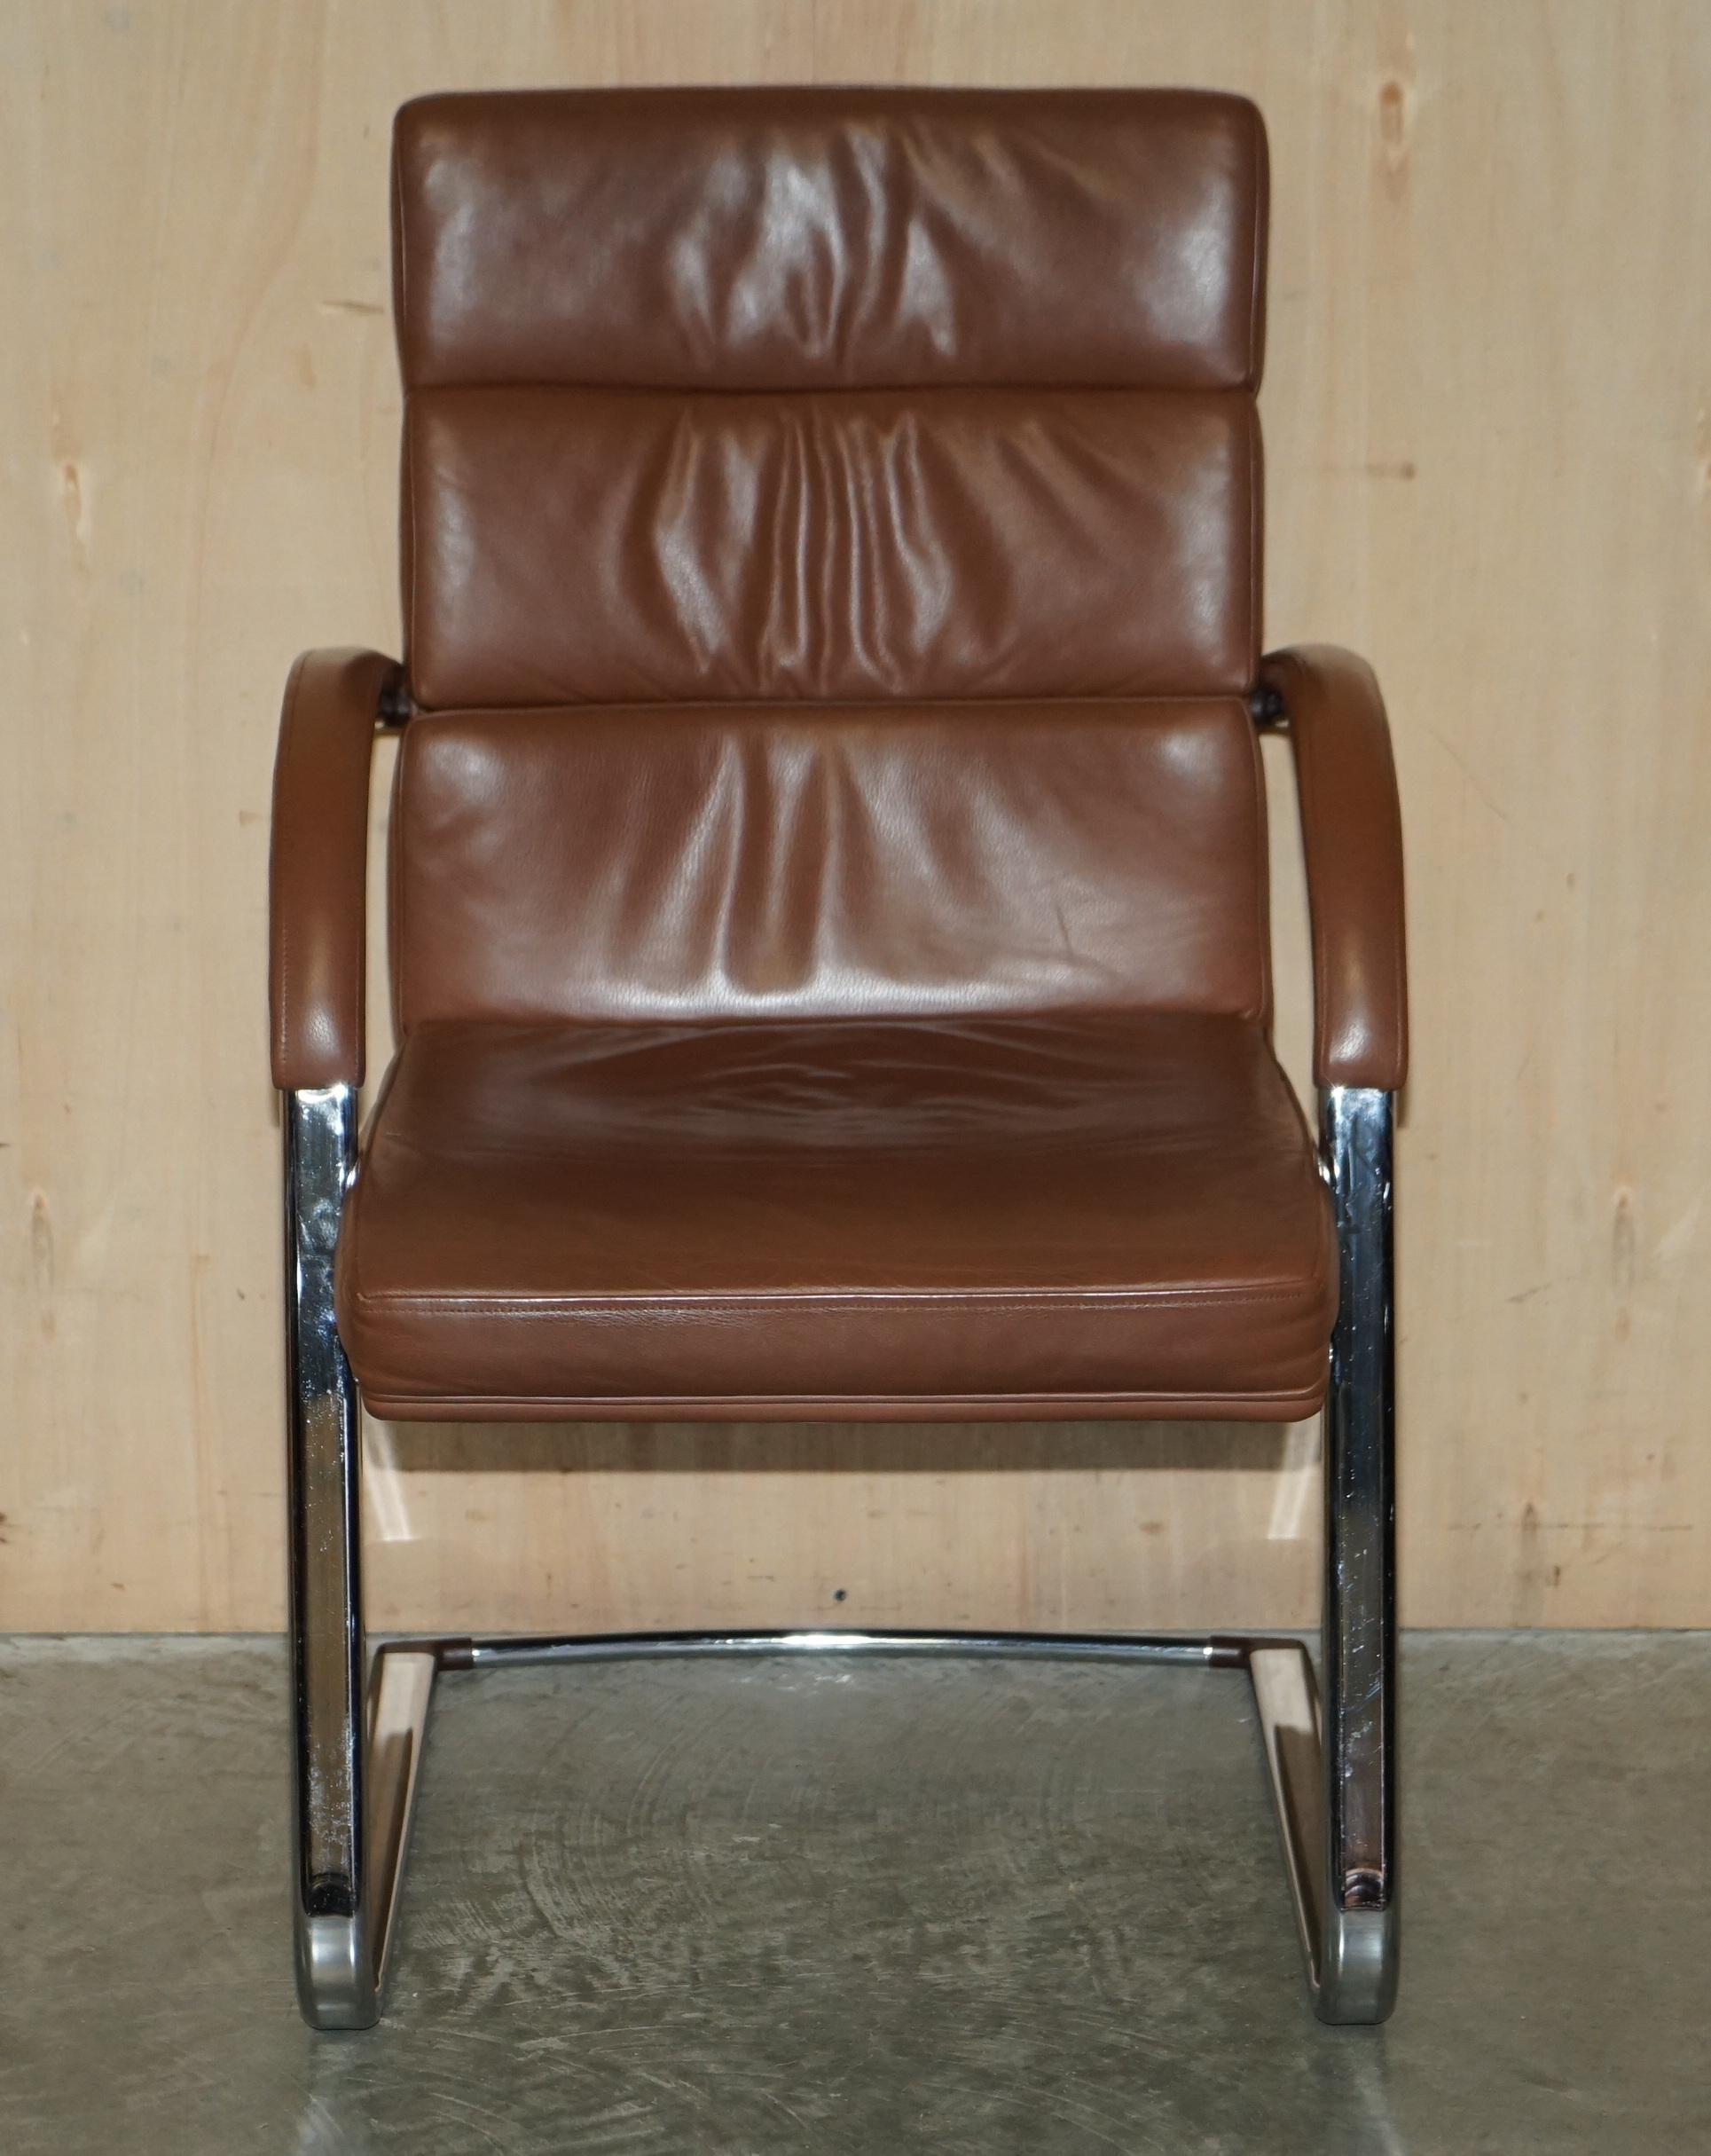 We are delighted to offer for sale 1 of 17 original William Hans Orion brown leather office chairs RR £1299

These are part of a luxury boardroom suite, the chairs are super and I mean super comfortable, you can literally sit in them all day every